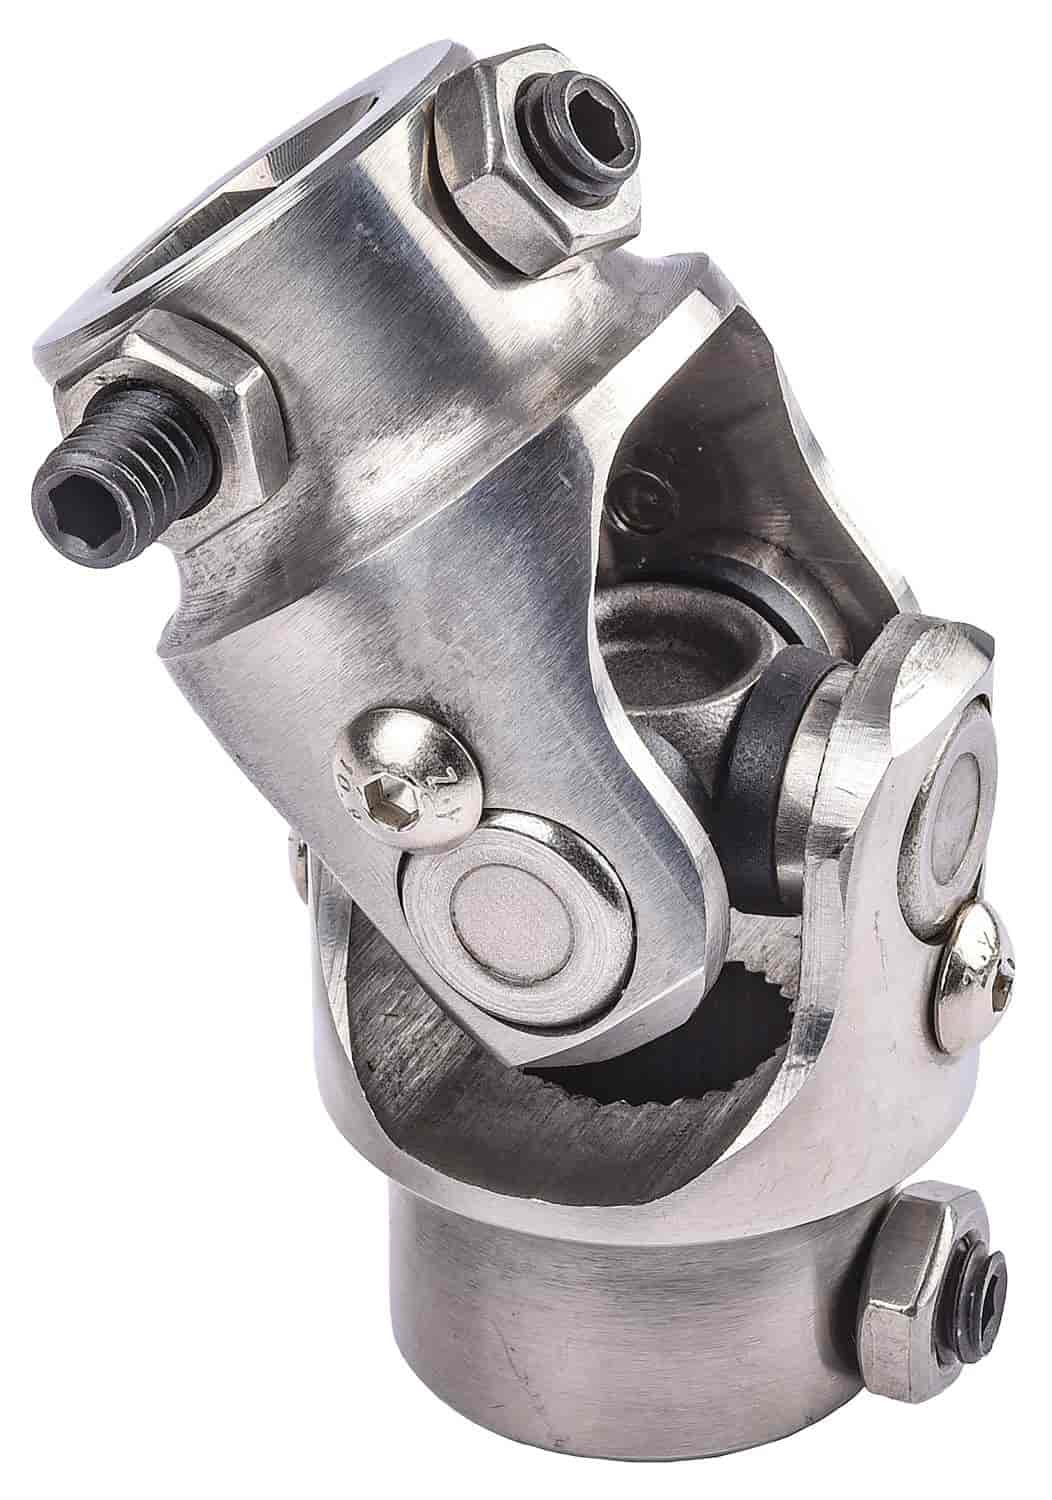 NEW STEERING UNIVERSAL JOINT,13/16"-36 X 3/4" DOUBLE D,COUPLING,NICKEL PLATED